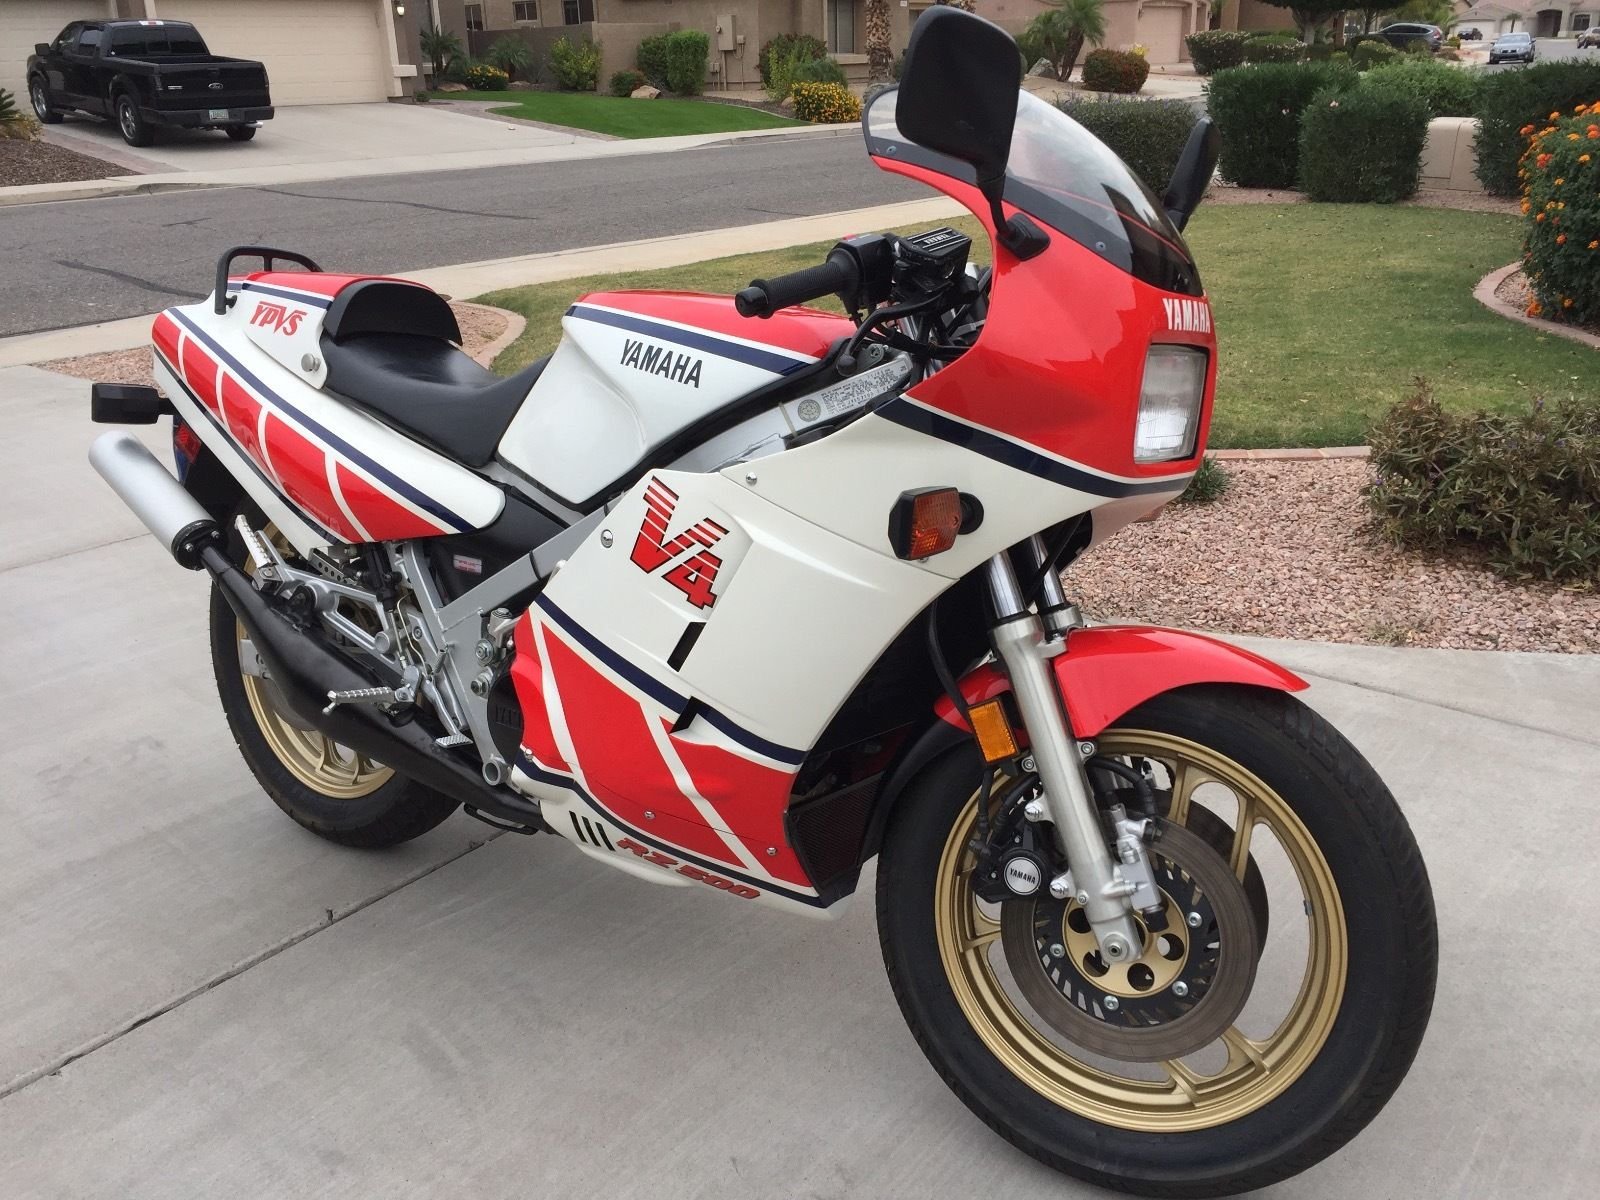 Yamaha Archives - Rare SportBikes For Sale